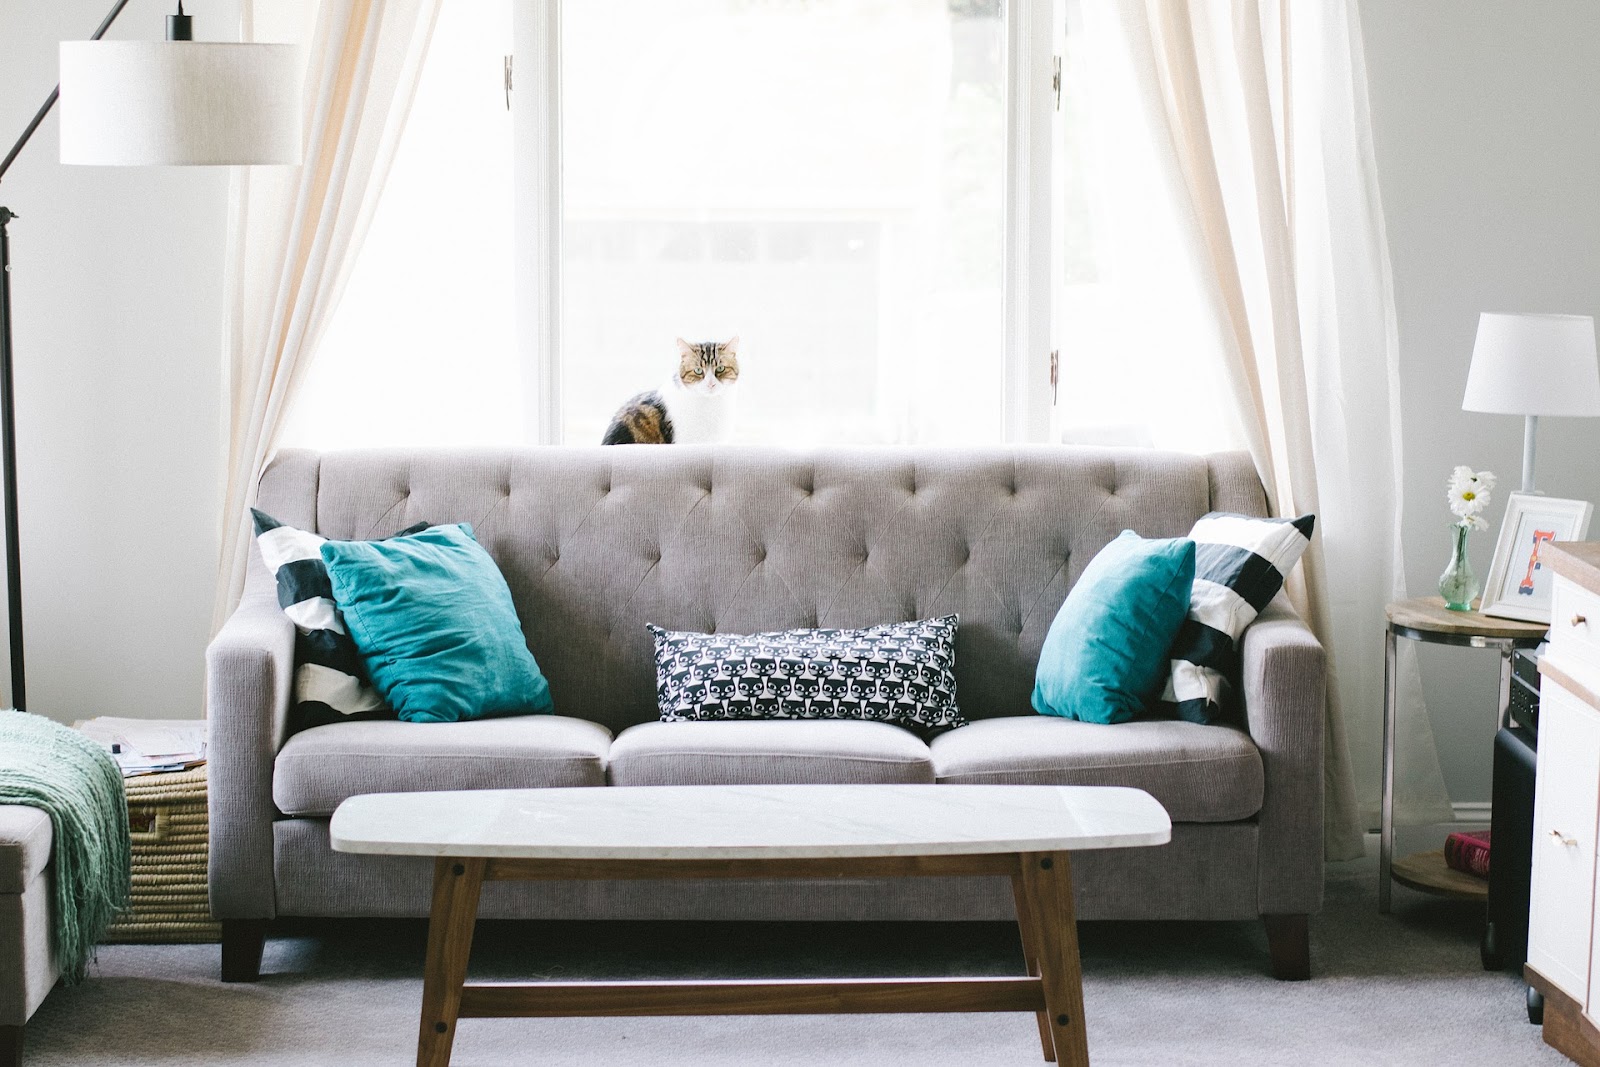 The best interior décor updates you can do to your home